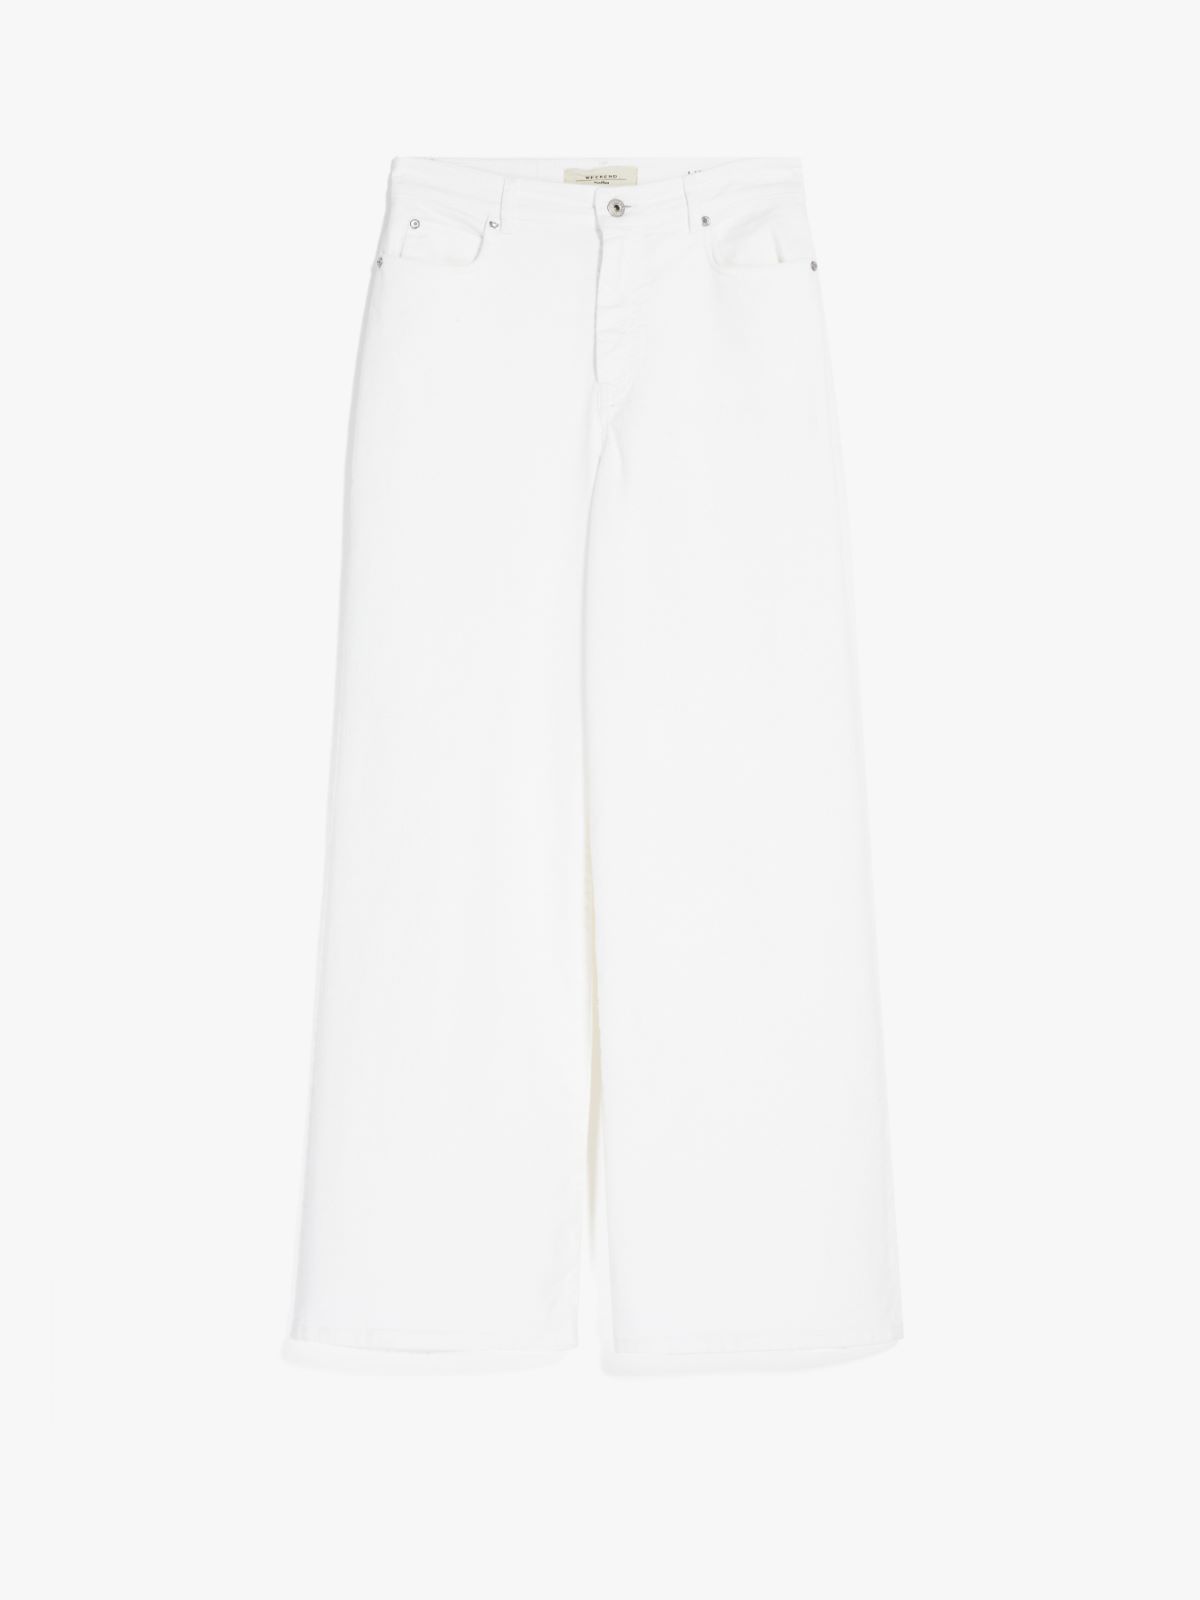 Stretch cotton trousers - WHITE - Weekend Max Mara - 5